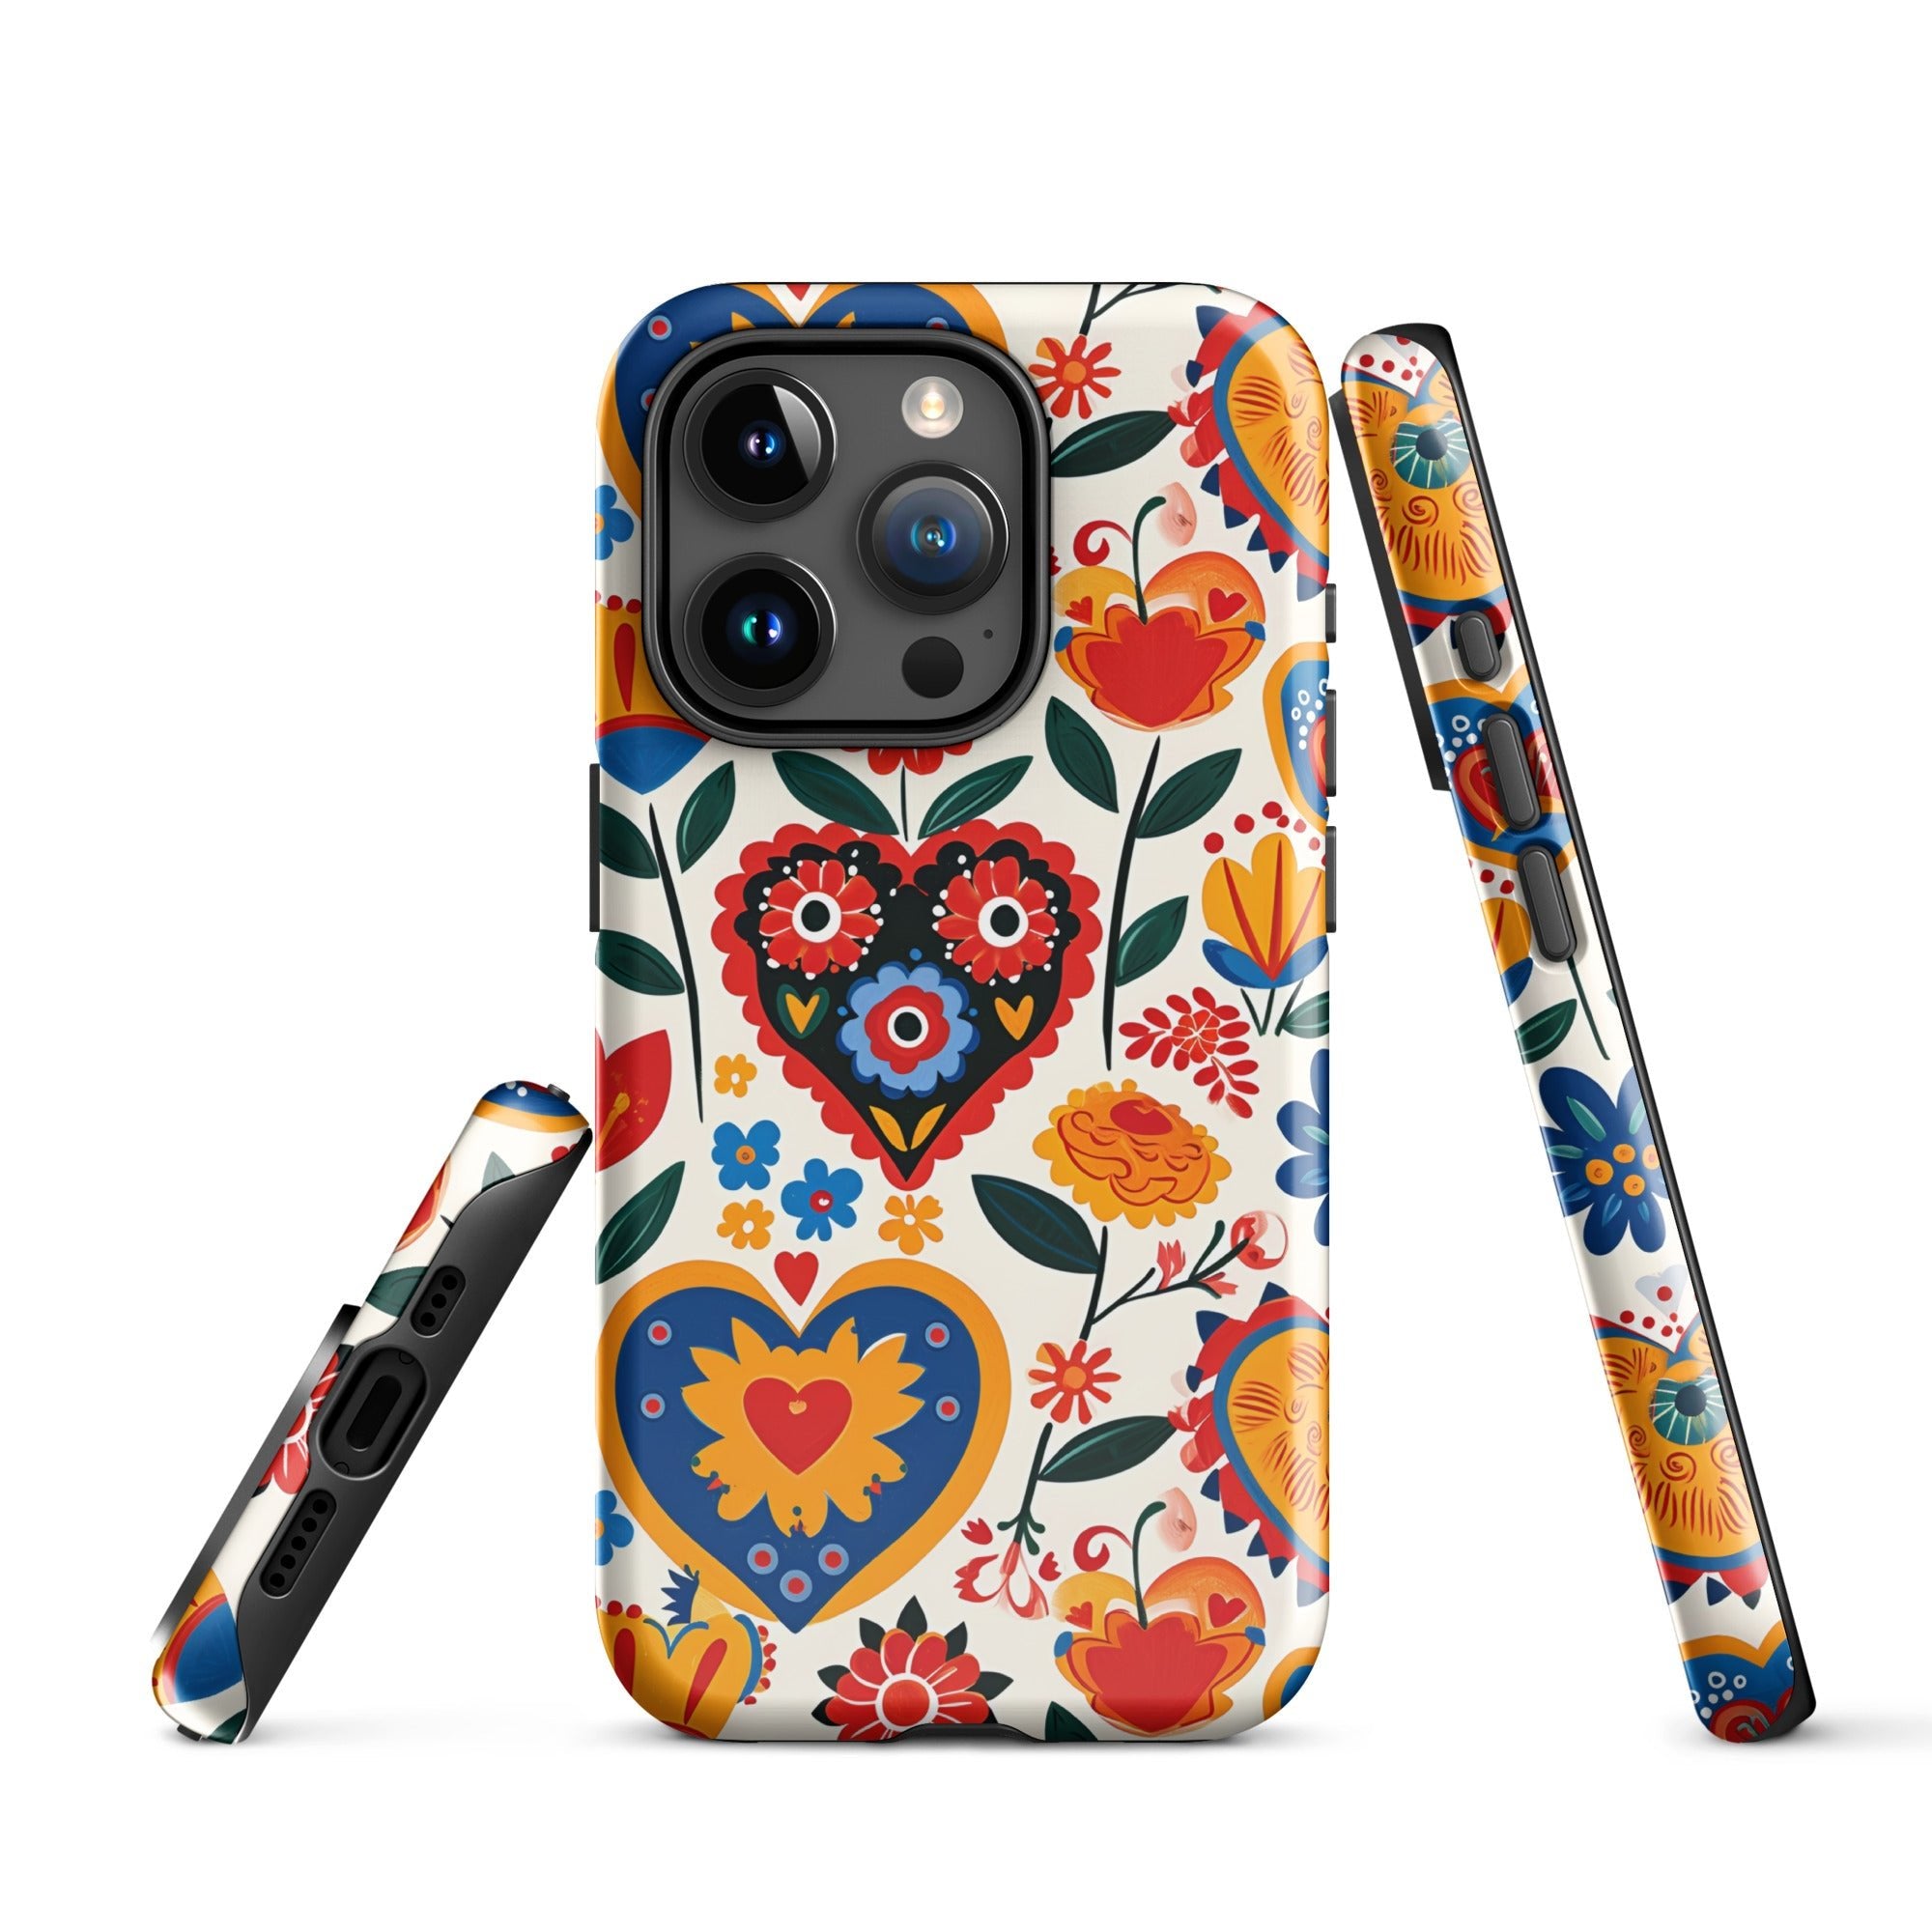 Whimsical Hearts: Bloomed Affections - iPhone Case - Pattern Symphony